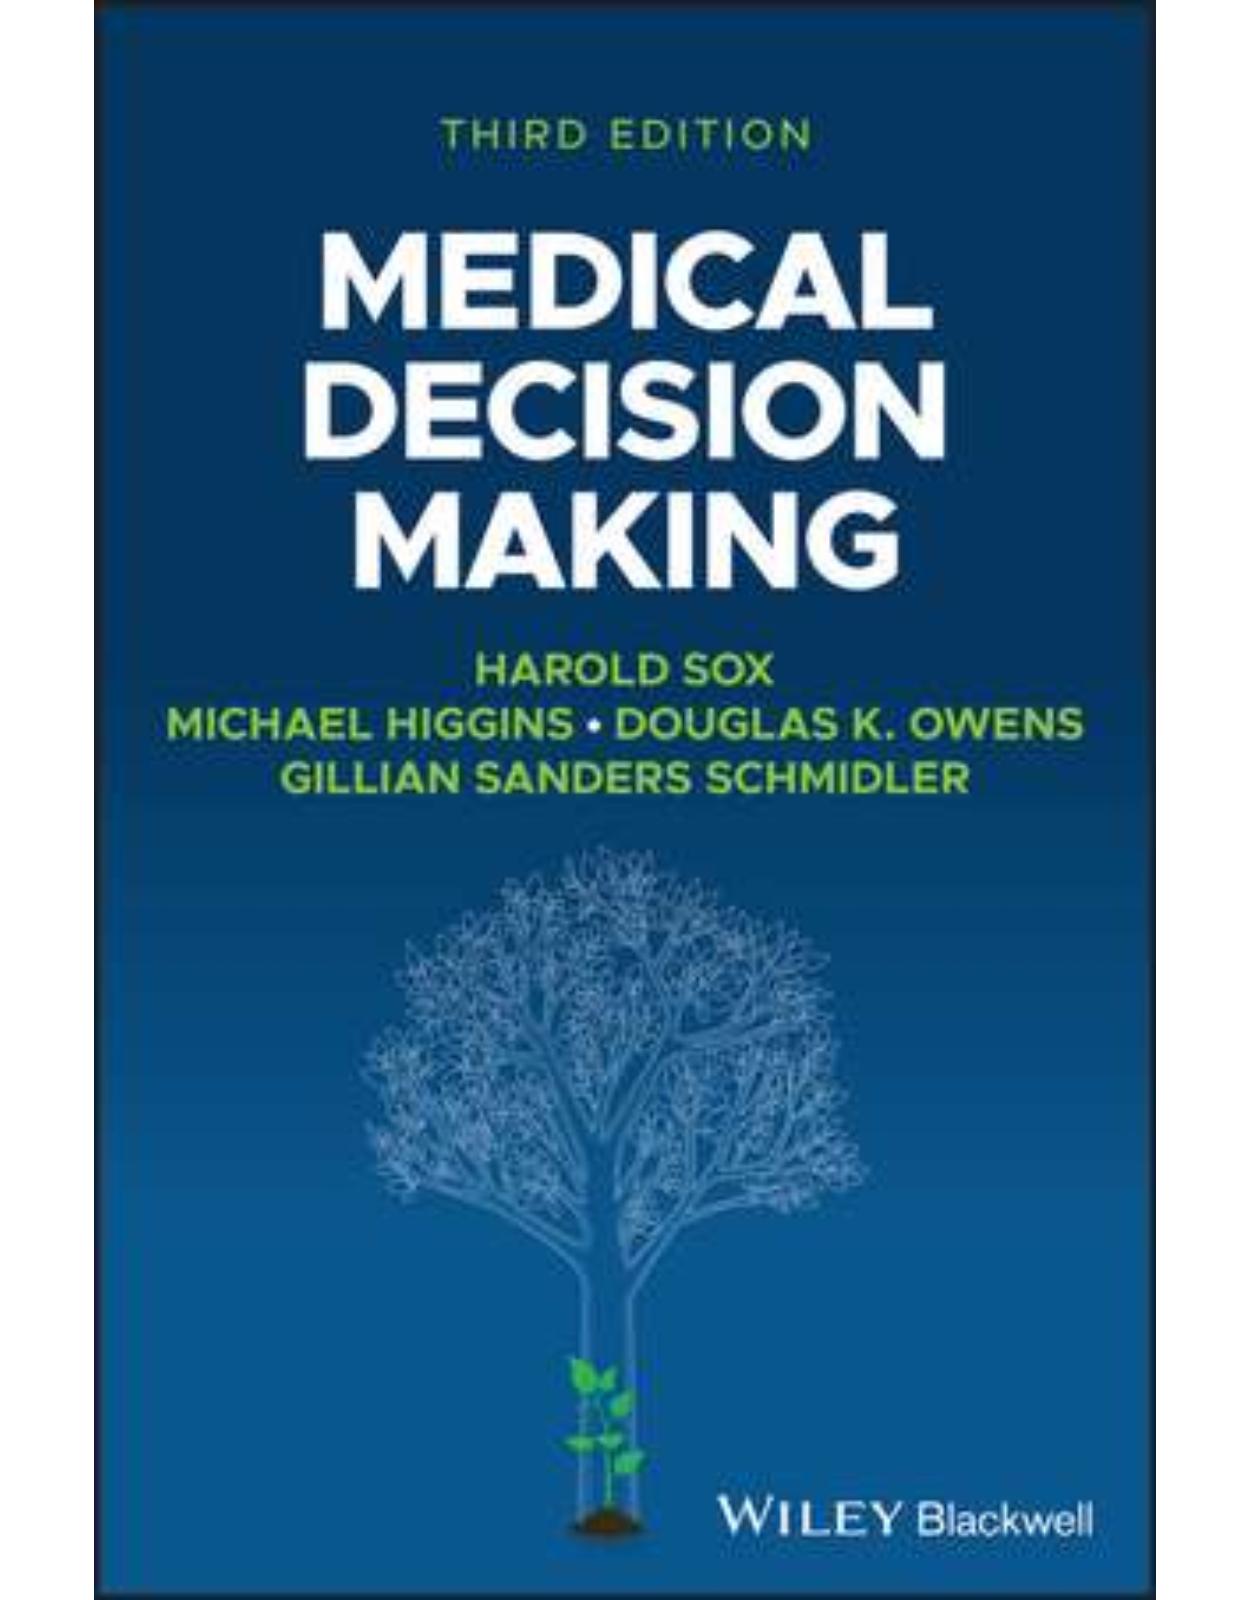 Medical Decision Making 3rd Edition